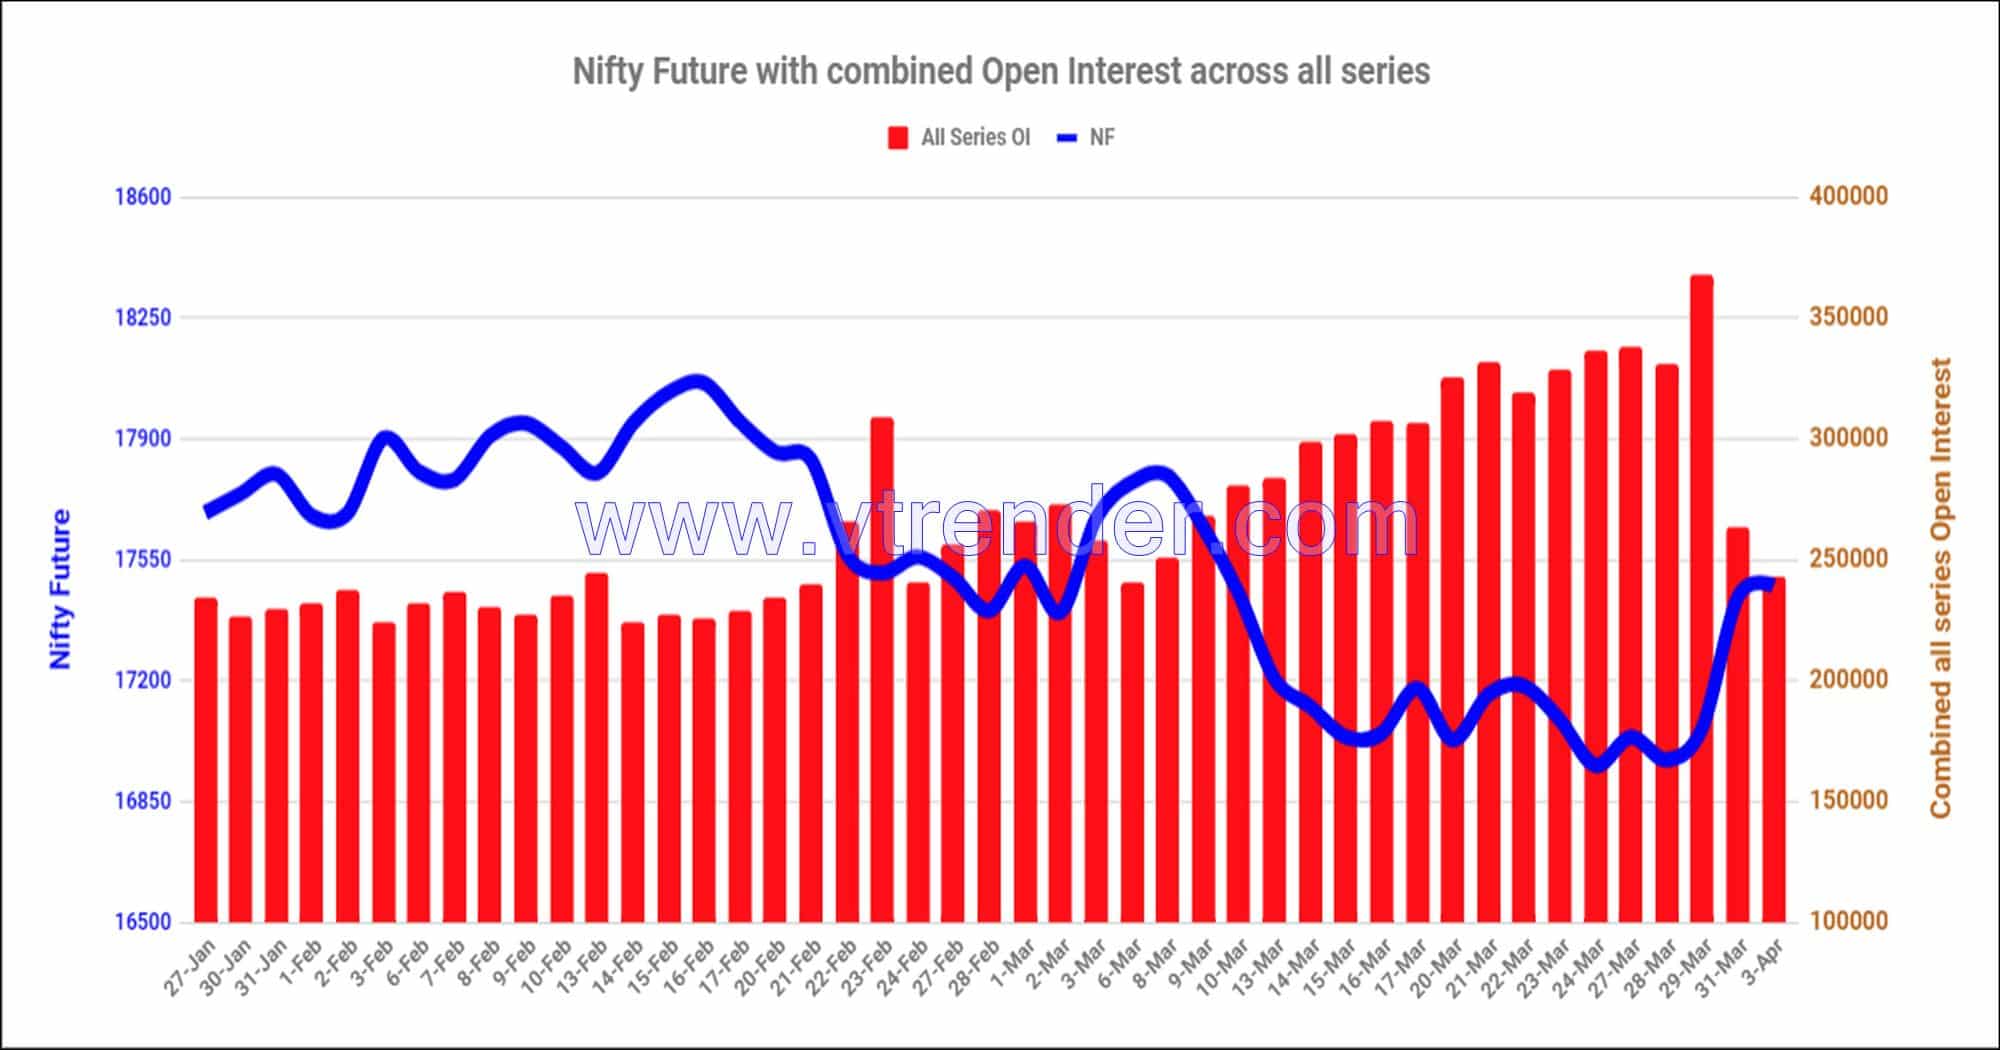 Nf03Apr Nifty And Banknifty Futures With All Series Combined Open Interest – 3Rd Apr 2023 Banknifty, Nifty, Open Interest